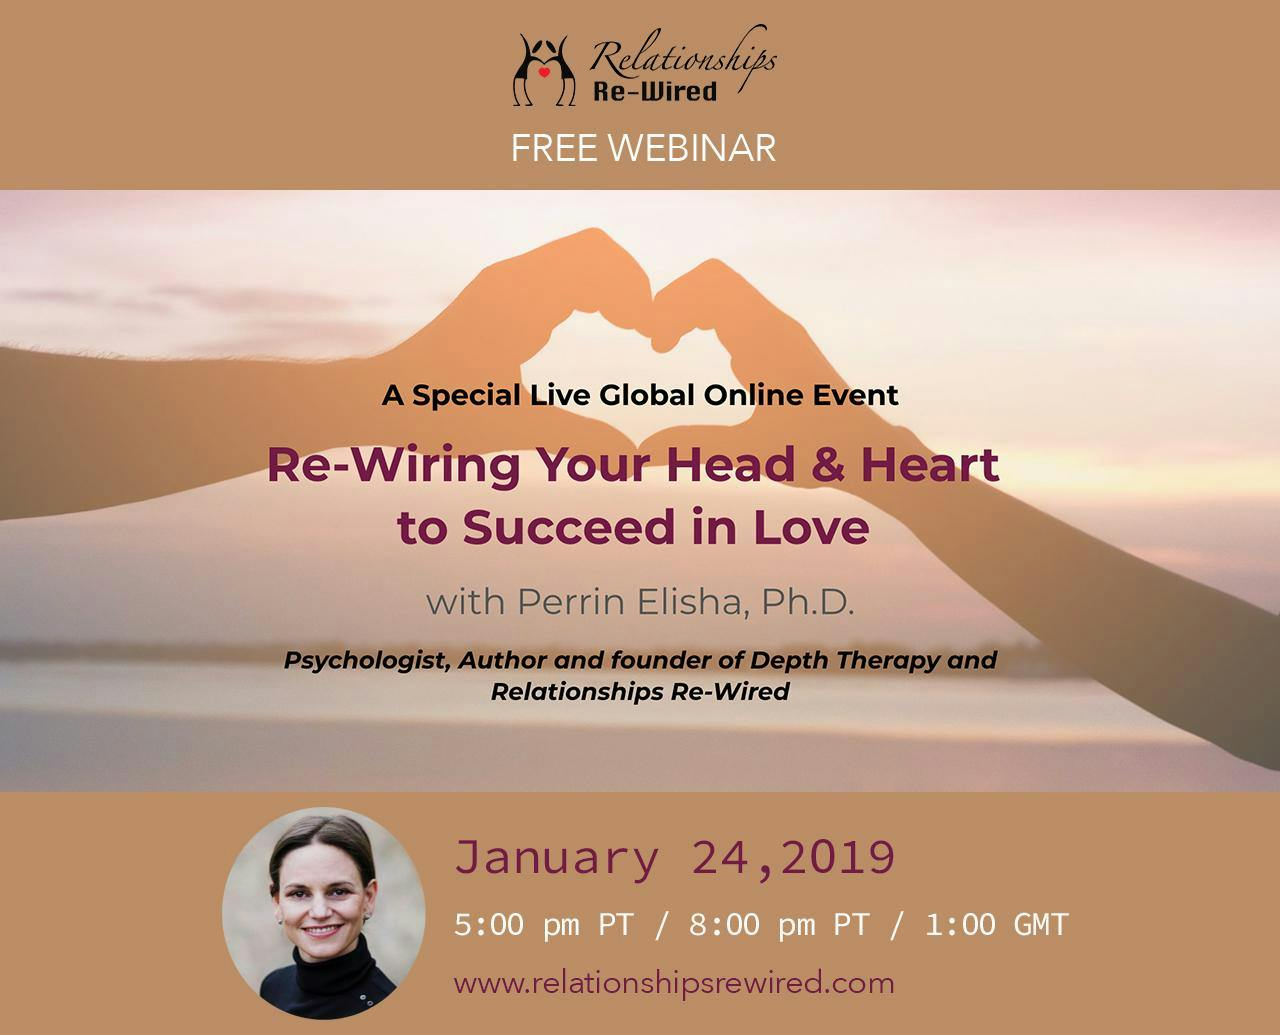 ReWire Your Head and Heart to Succeed In Love, a Free Webinar